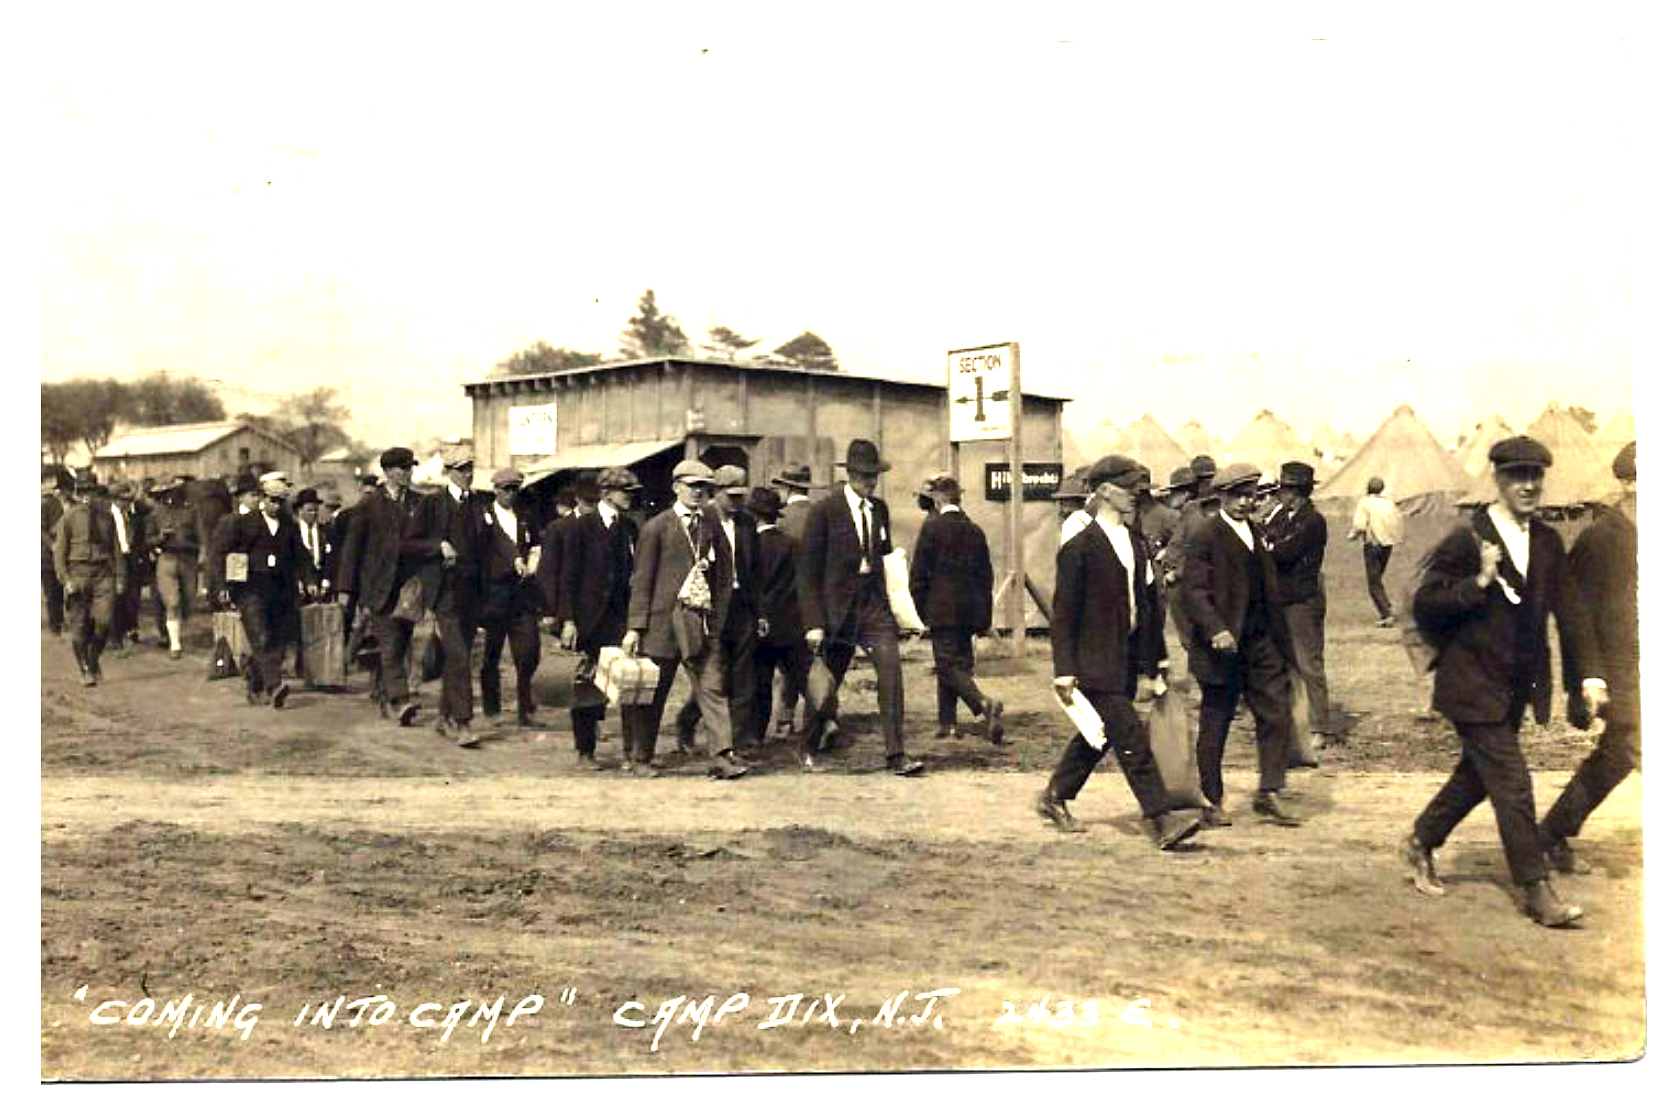 Camp Dix - Recruits coming into camp - probably around 1917